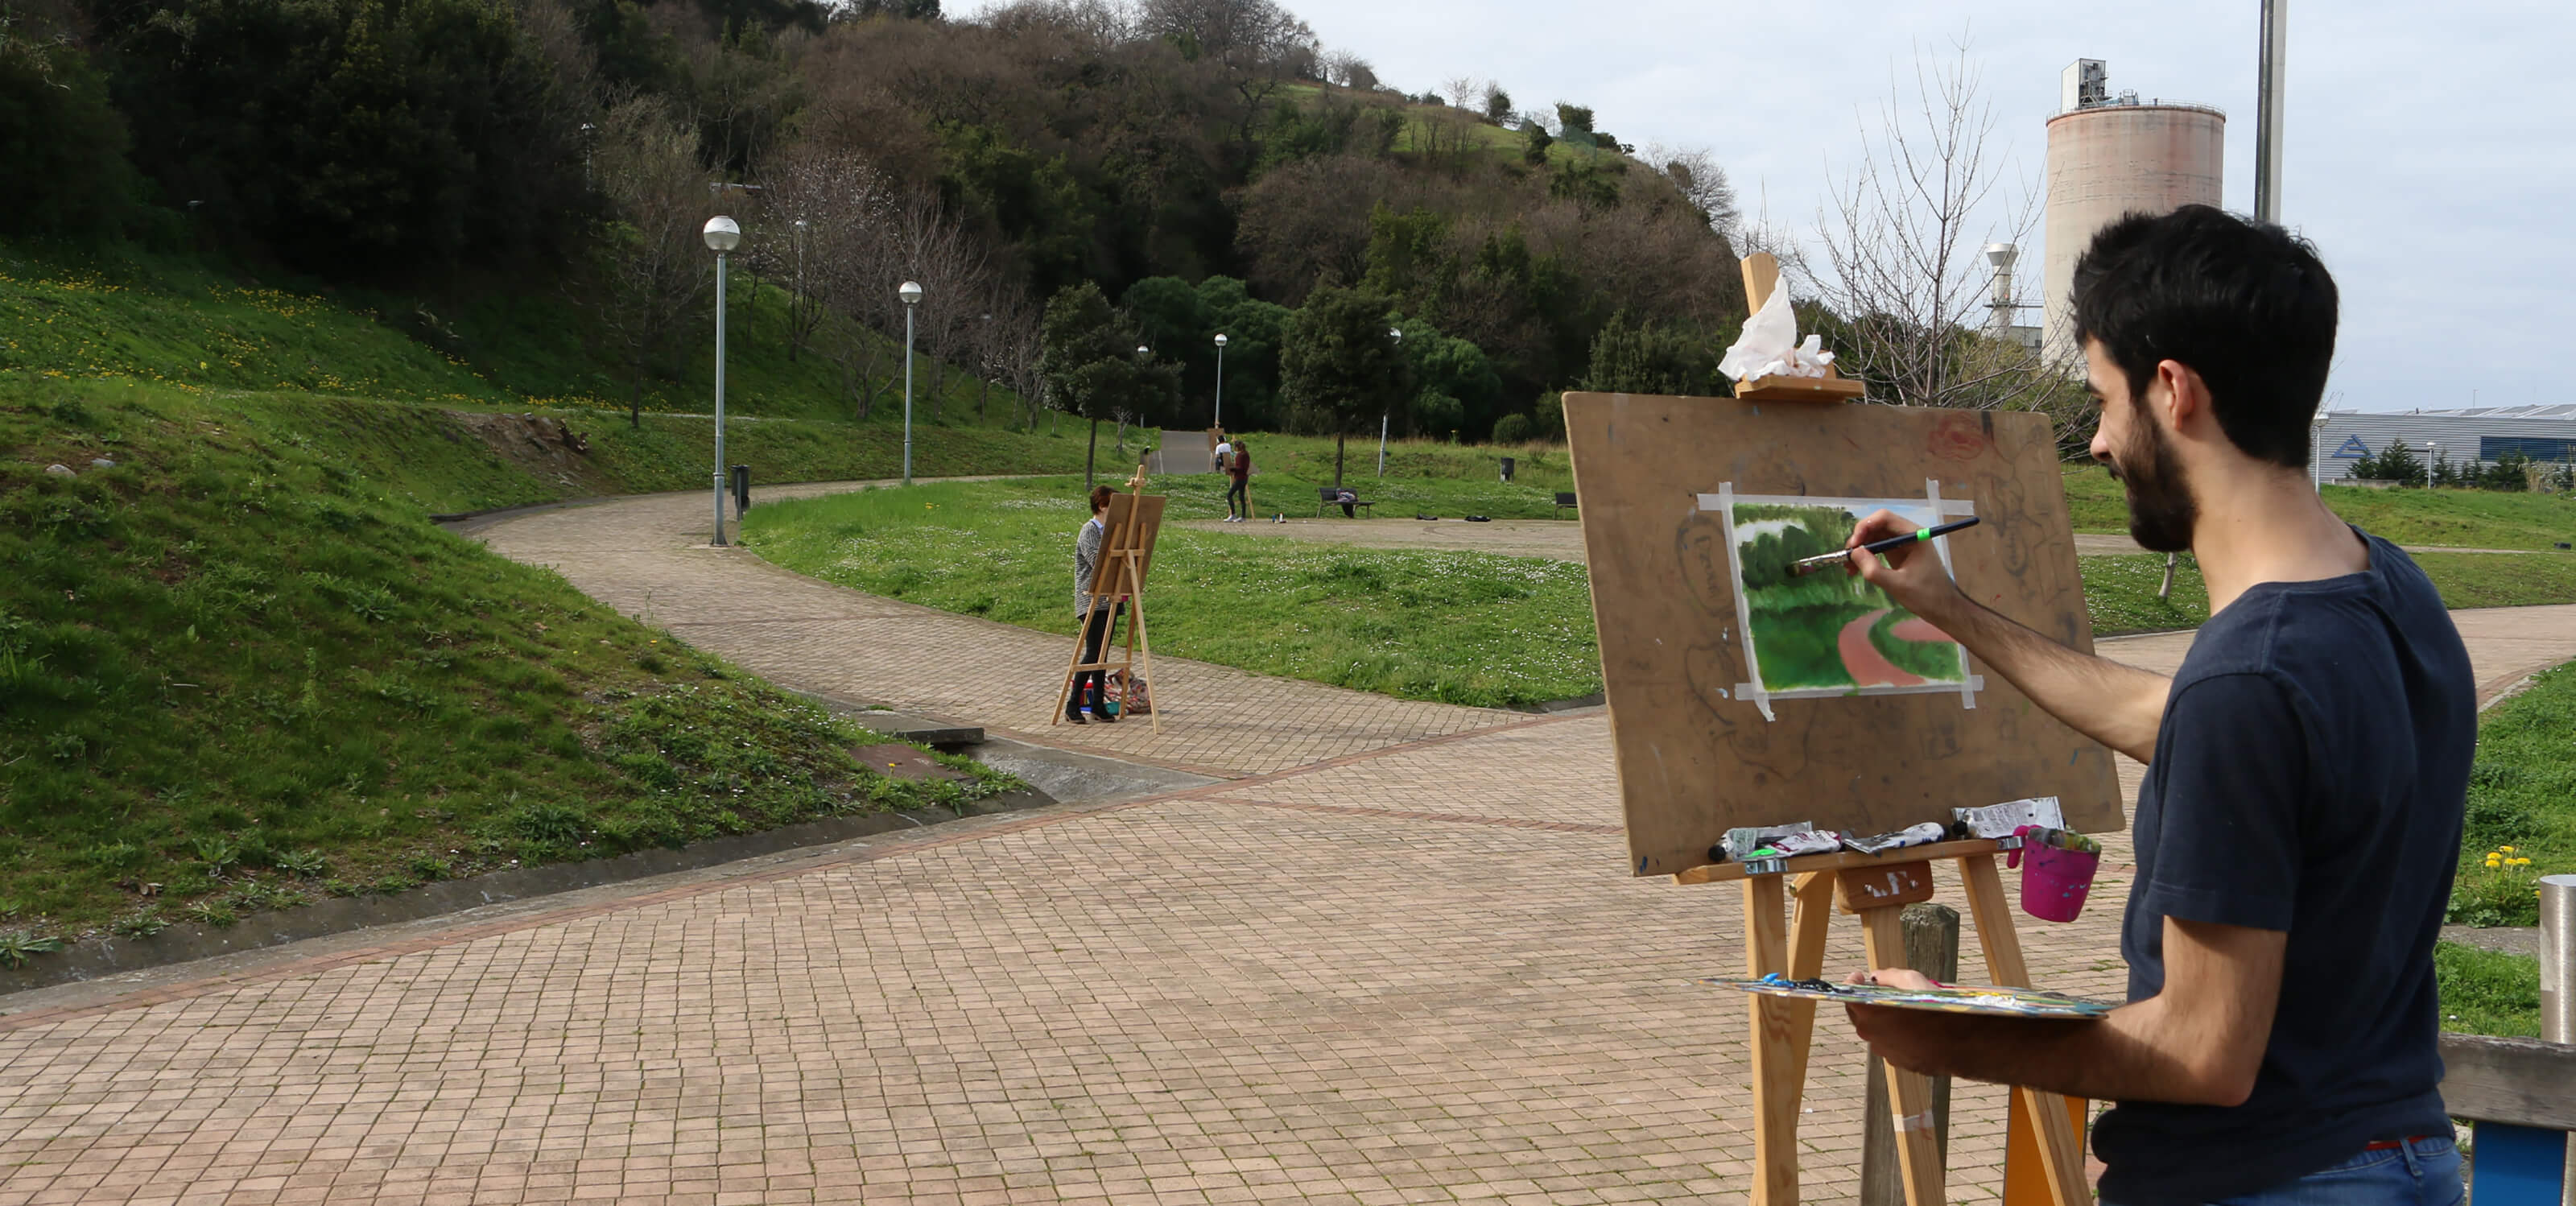 DigiPen Europe-Bilbao students painting at easels in a park.